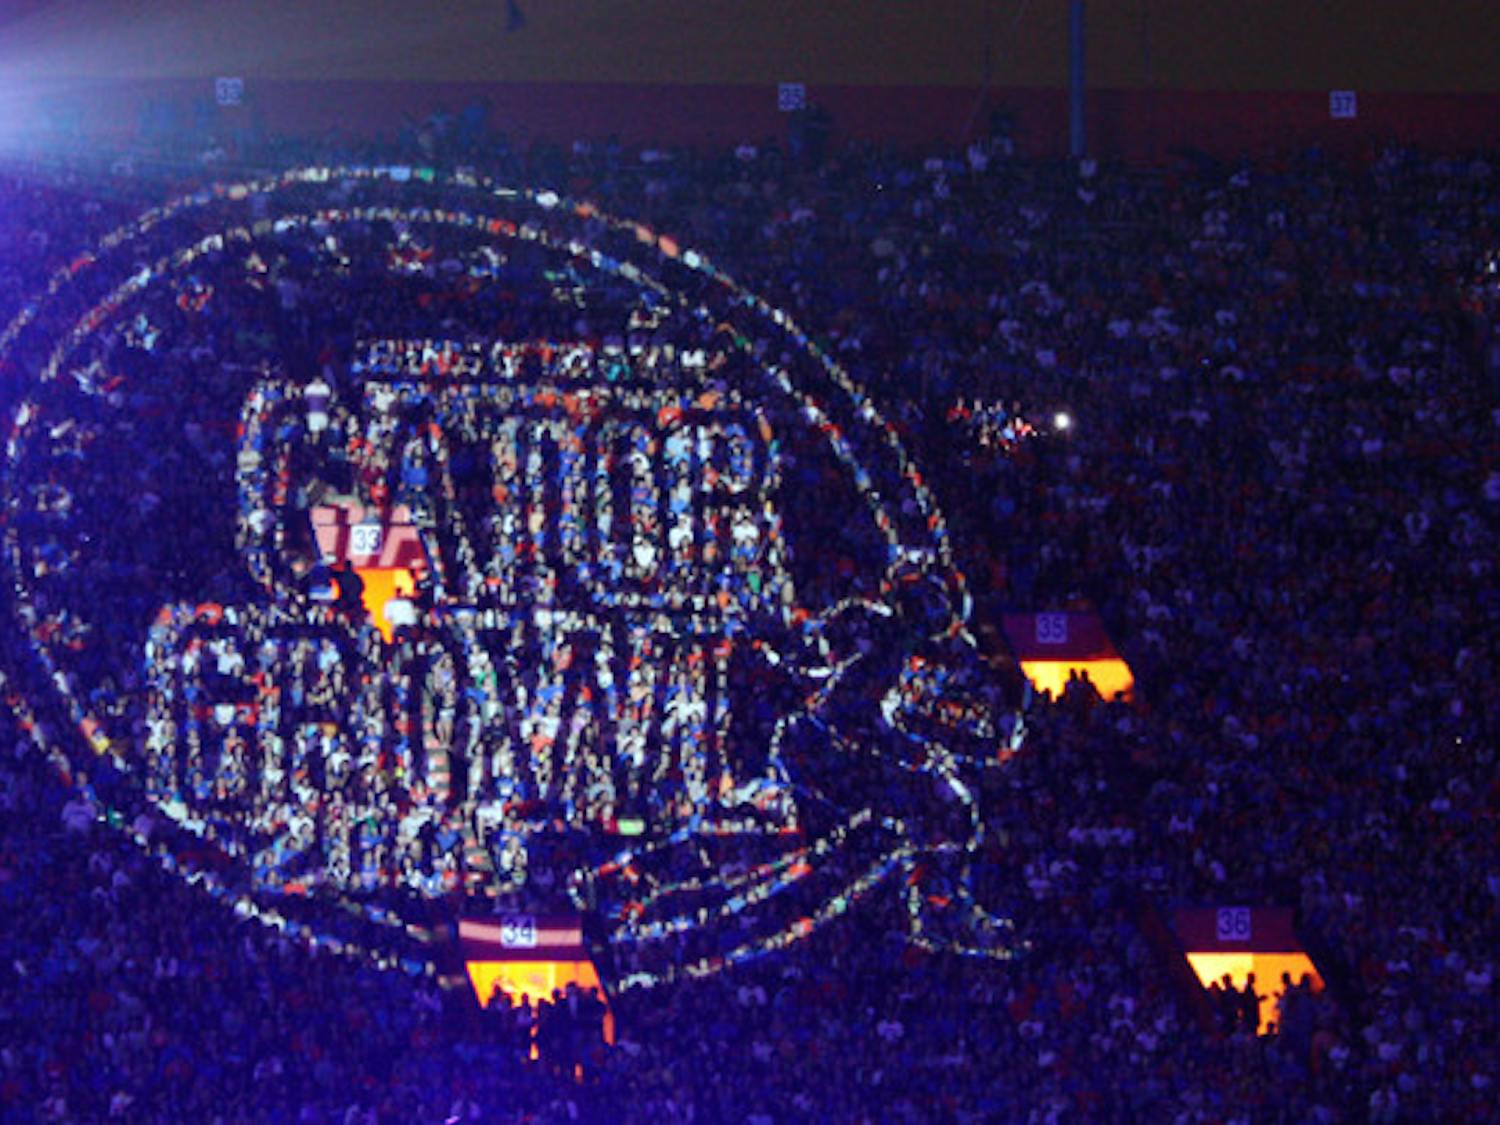 A Gator Growl light projection shines over the crowd during a previous homecoming celebration. The event, known as "the largest student-run pep rally in the world," will have fireworks this year.